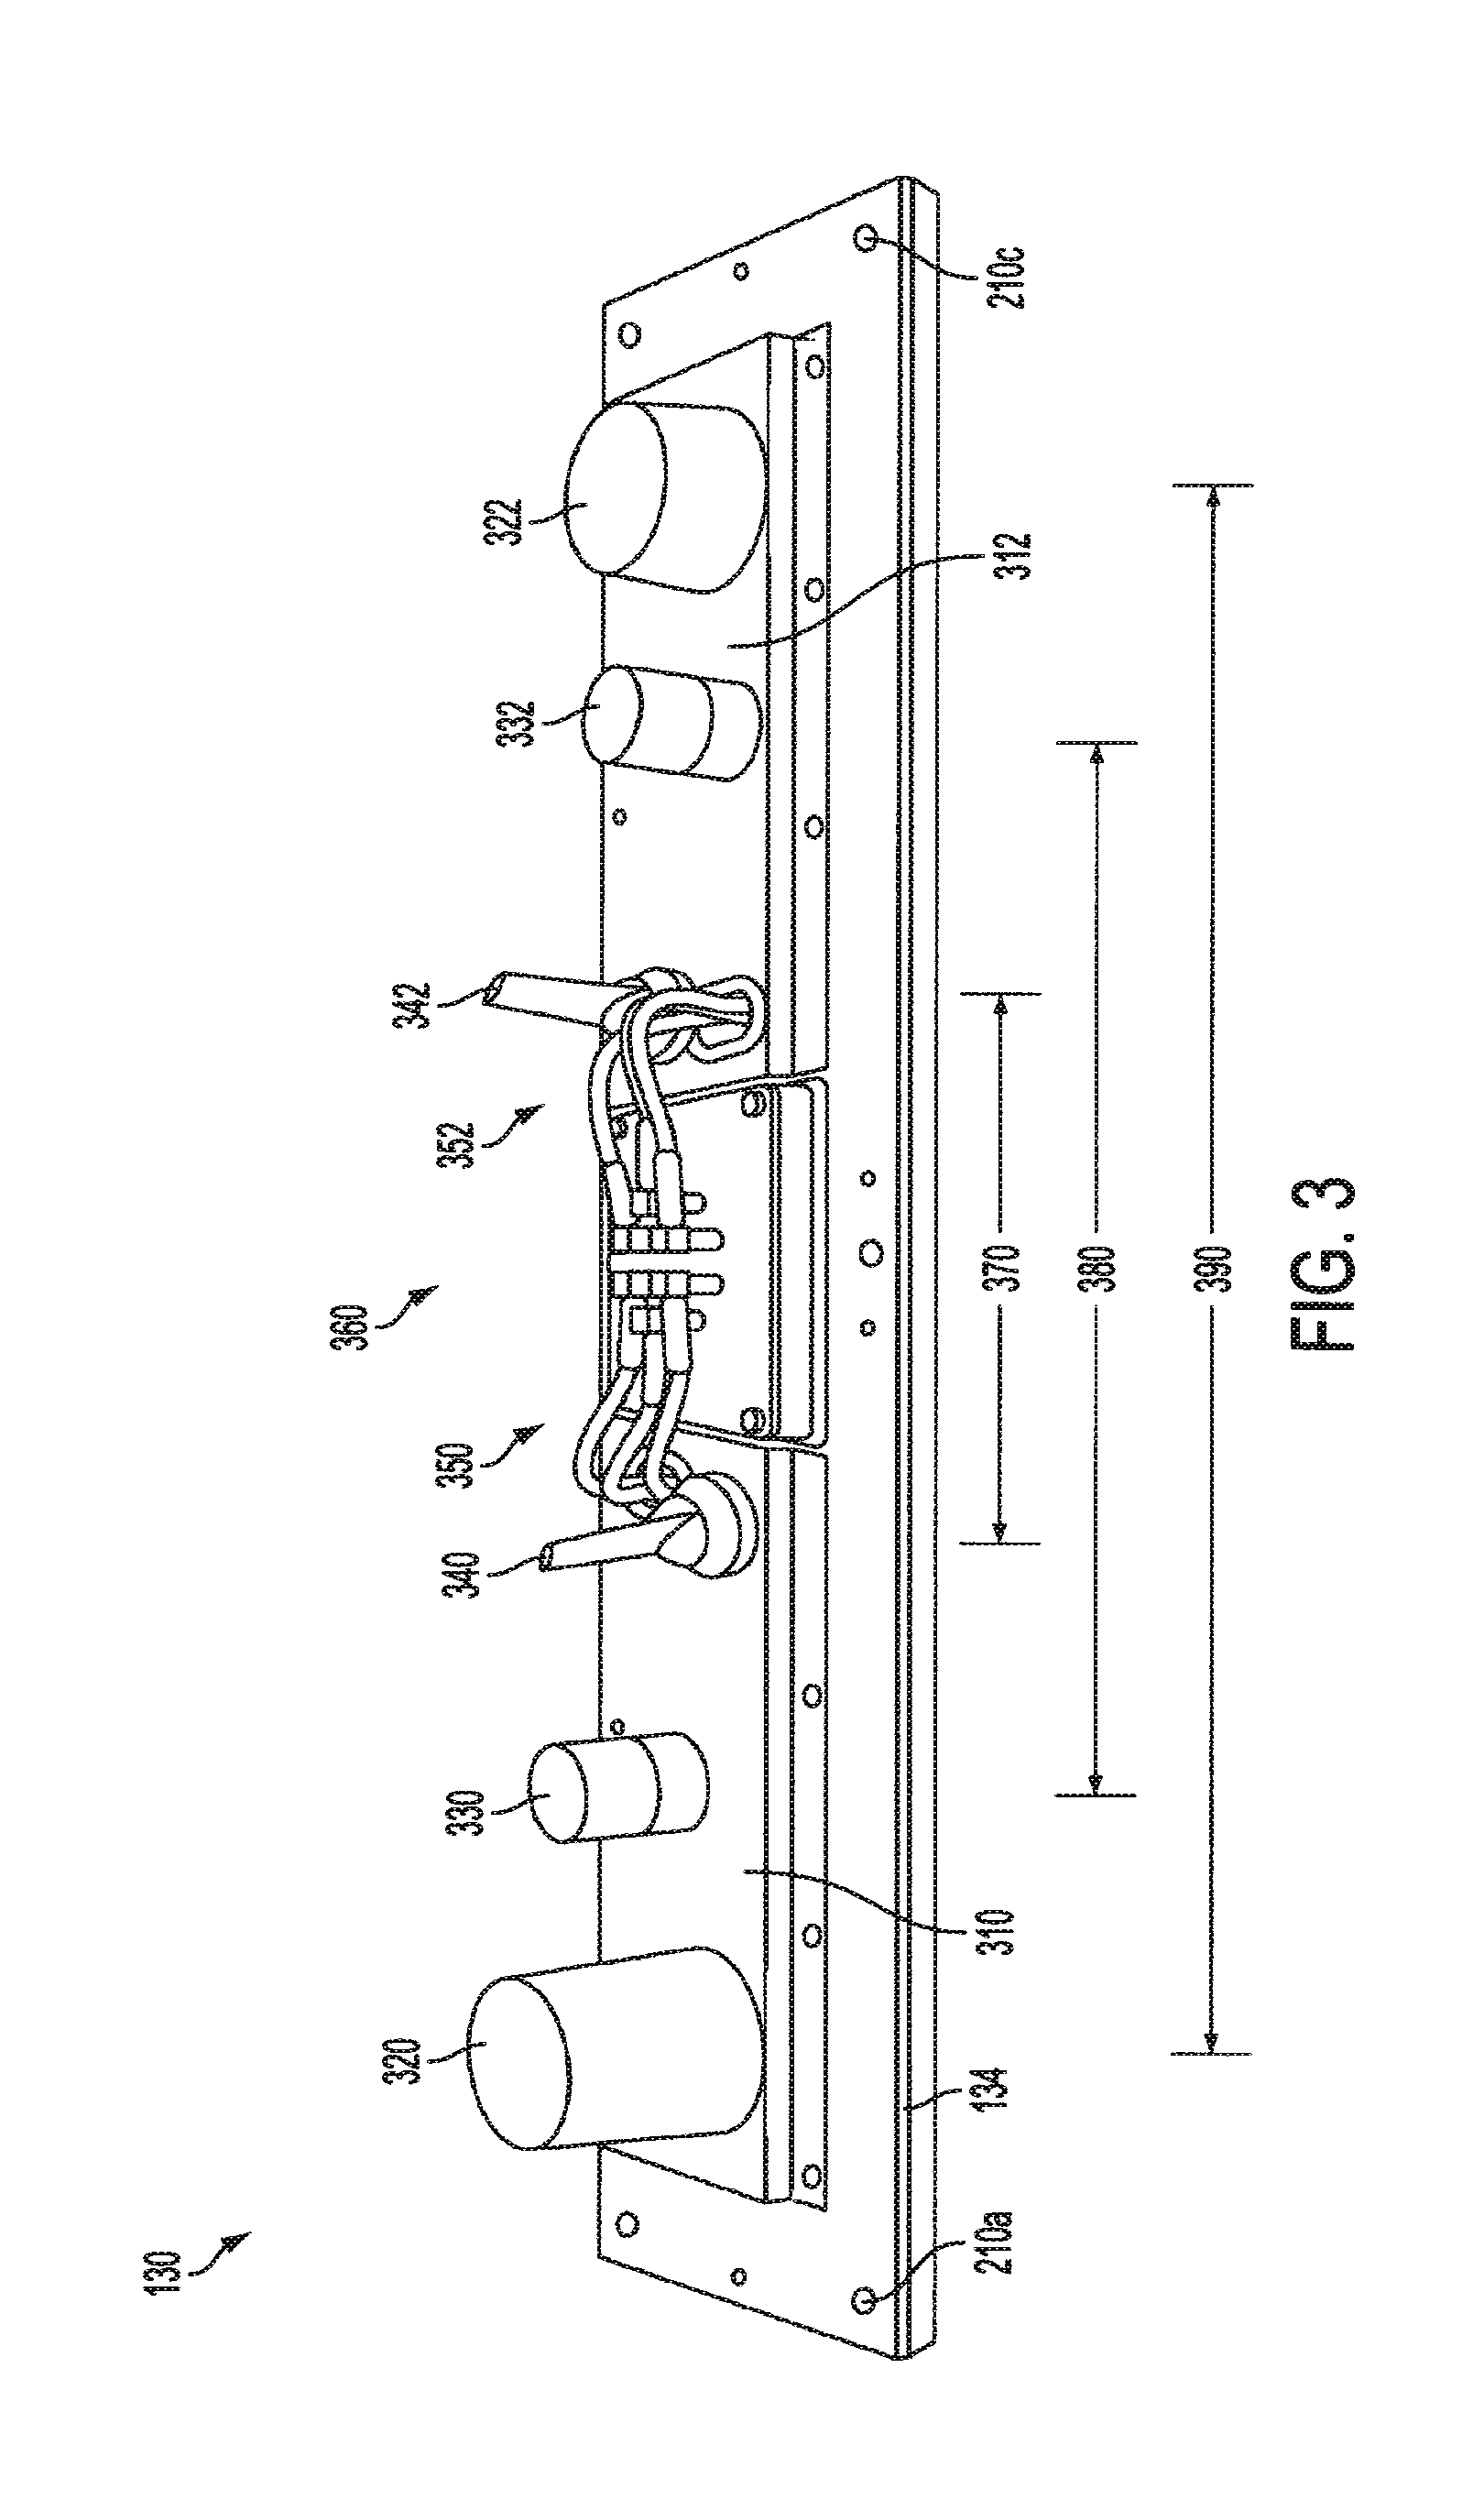 System and apparatus for locomotive radio communications